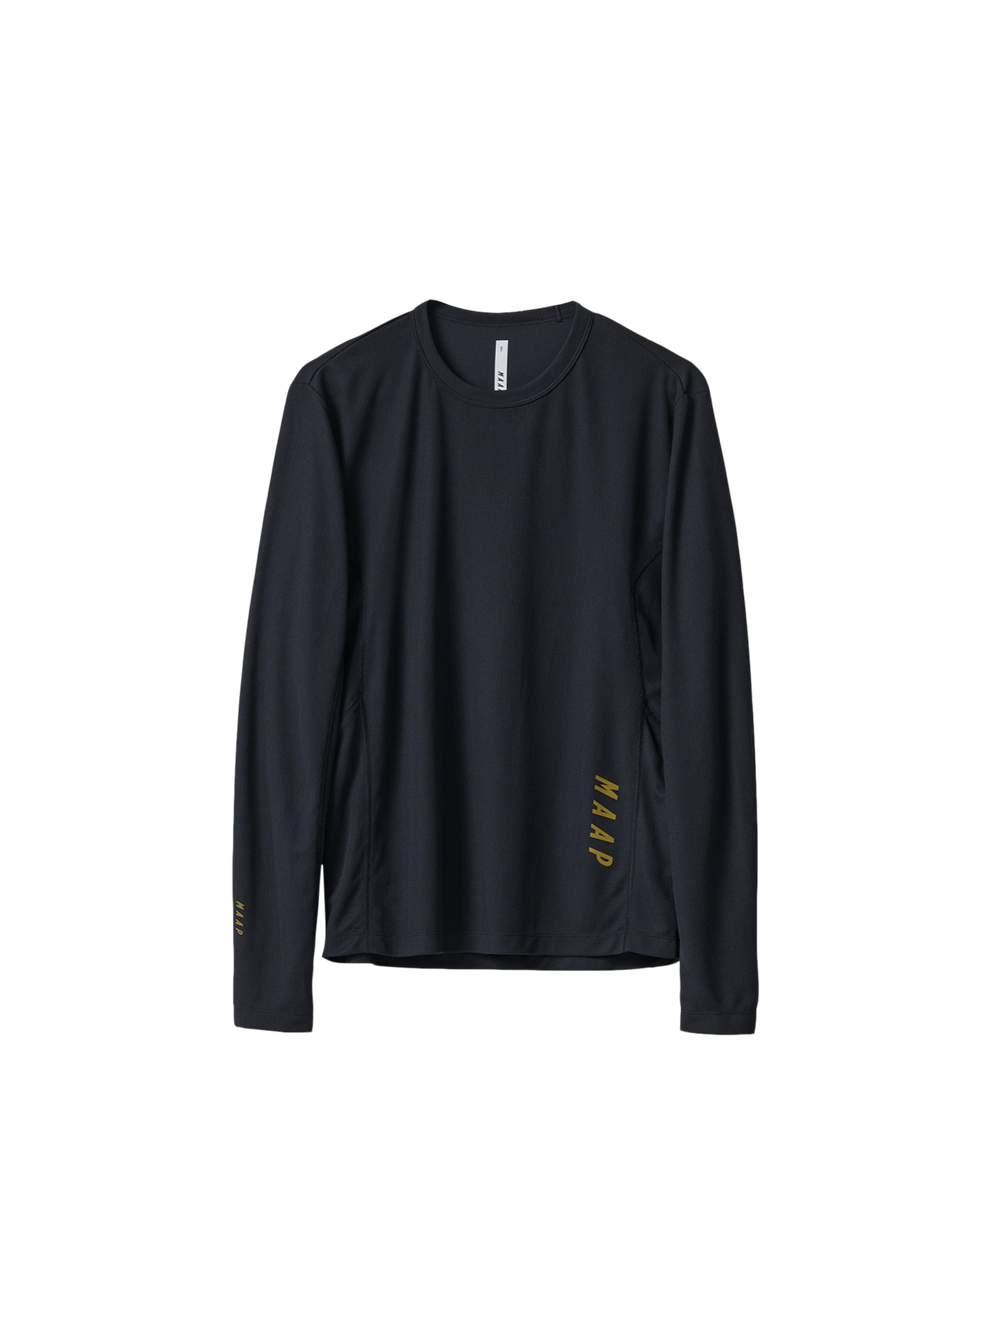 Product Image for Alt_Road Ride LS Tee 3.0